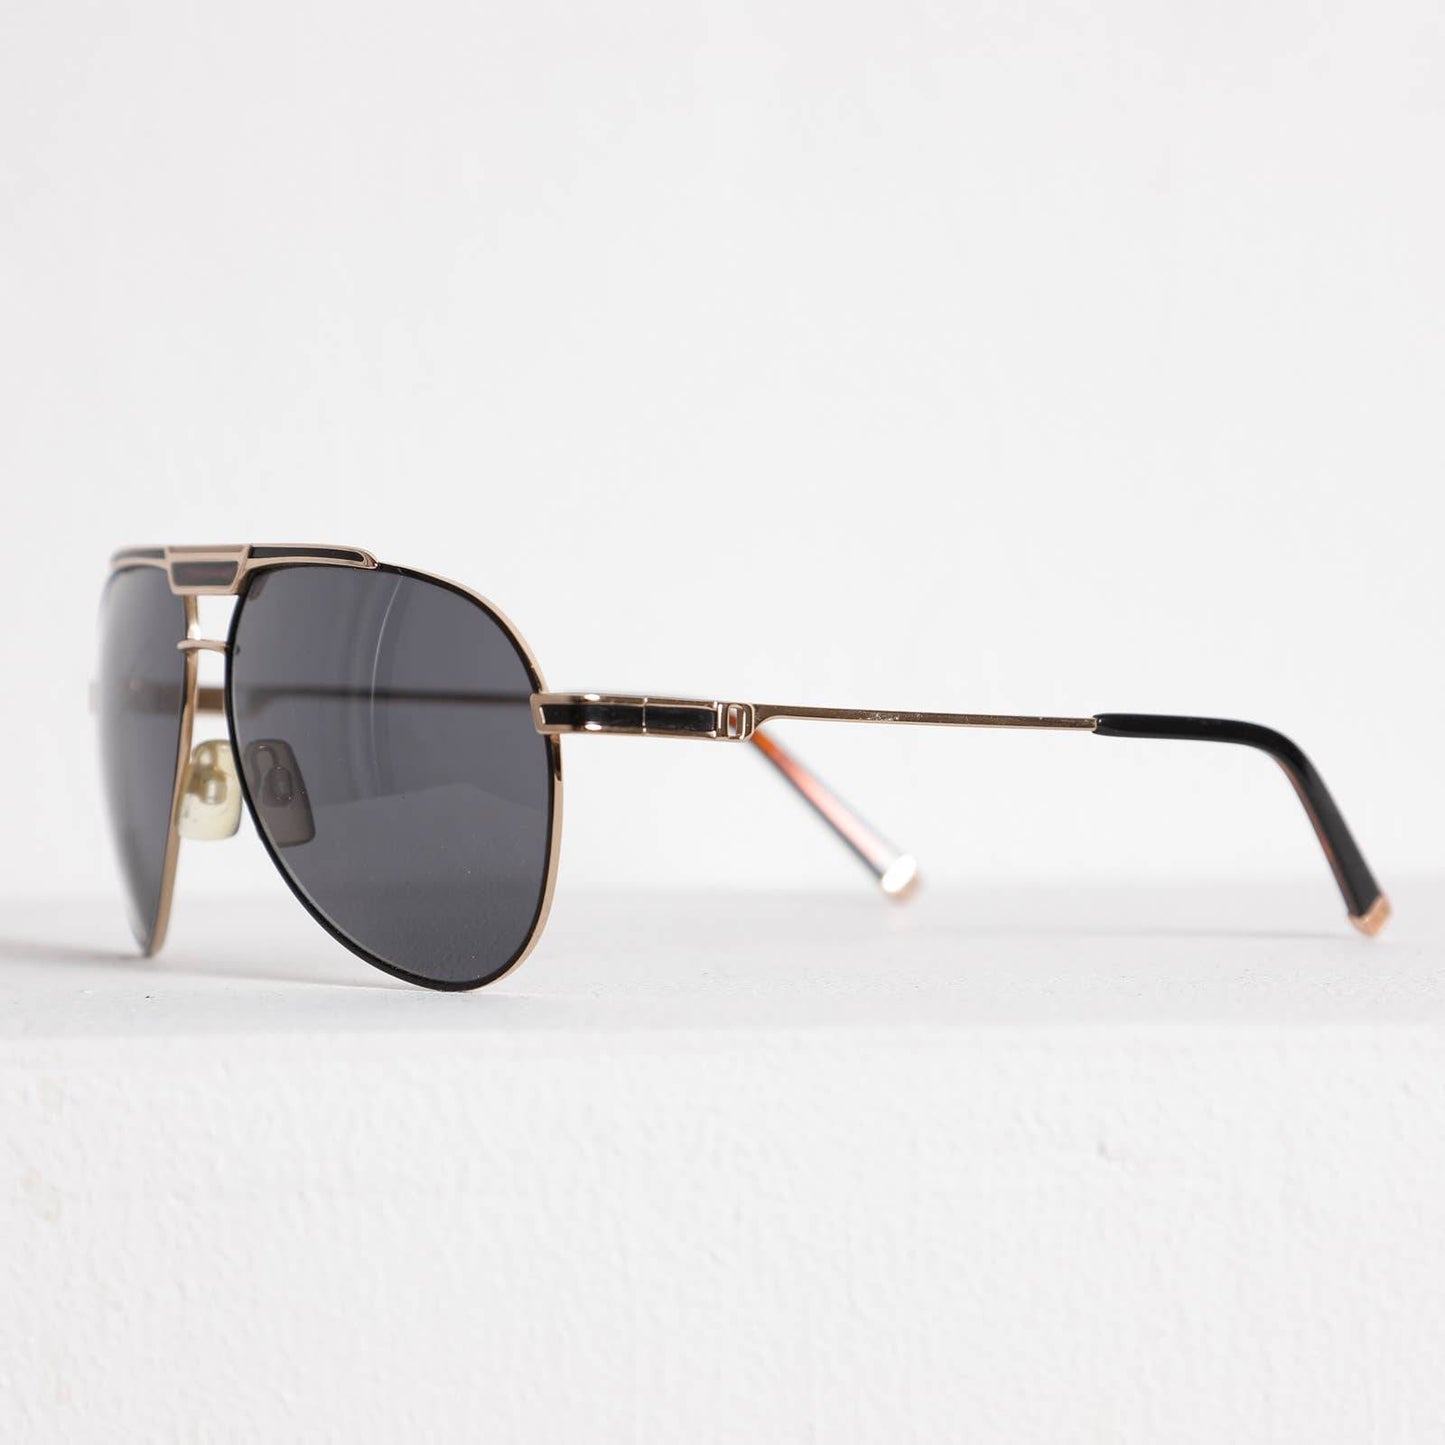 DSQUARED2 Black and Gold Sunglasses